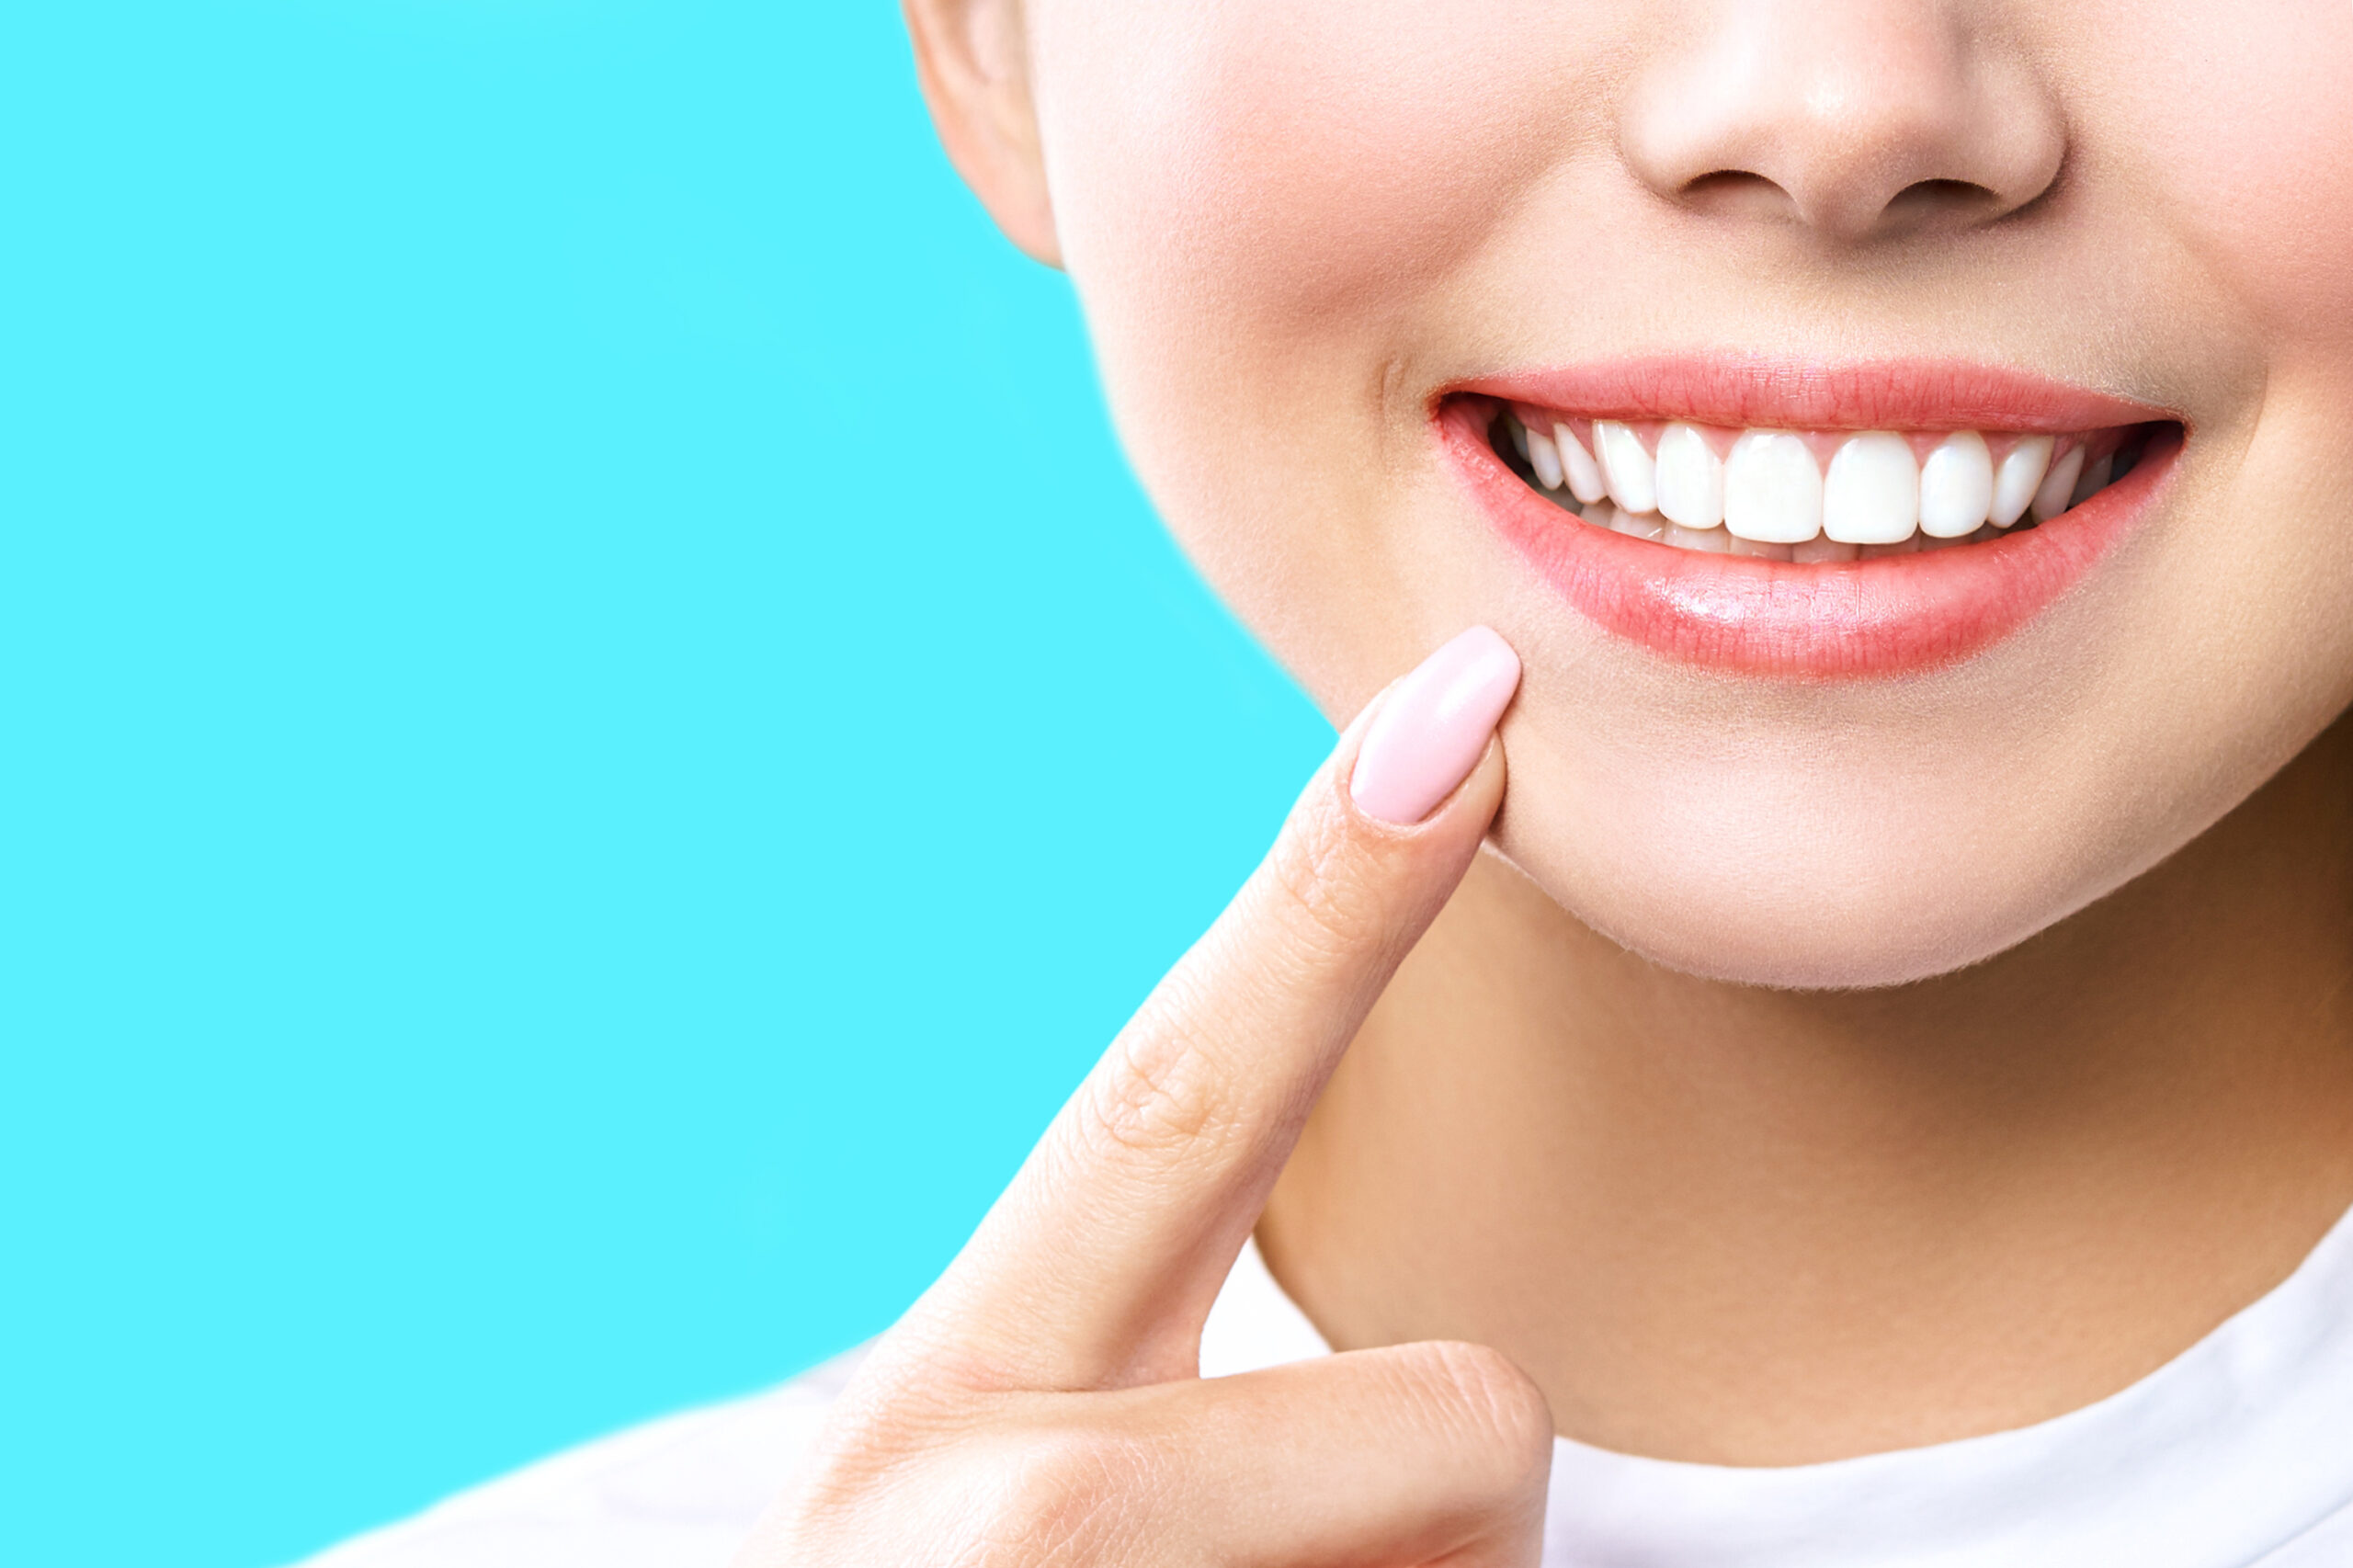 Perfect healthy teeth smile of a young woman. Teeth whitening. Dental clinic patient. Image symbolizes oral care dentistry, stomatology. blue Background.